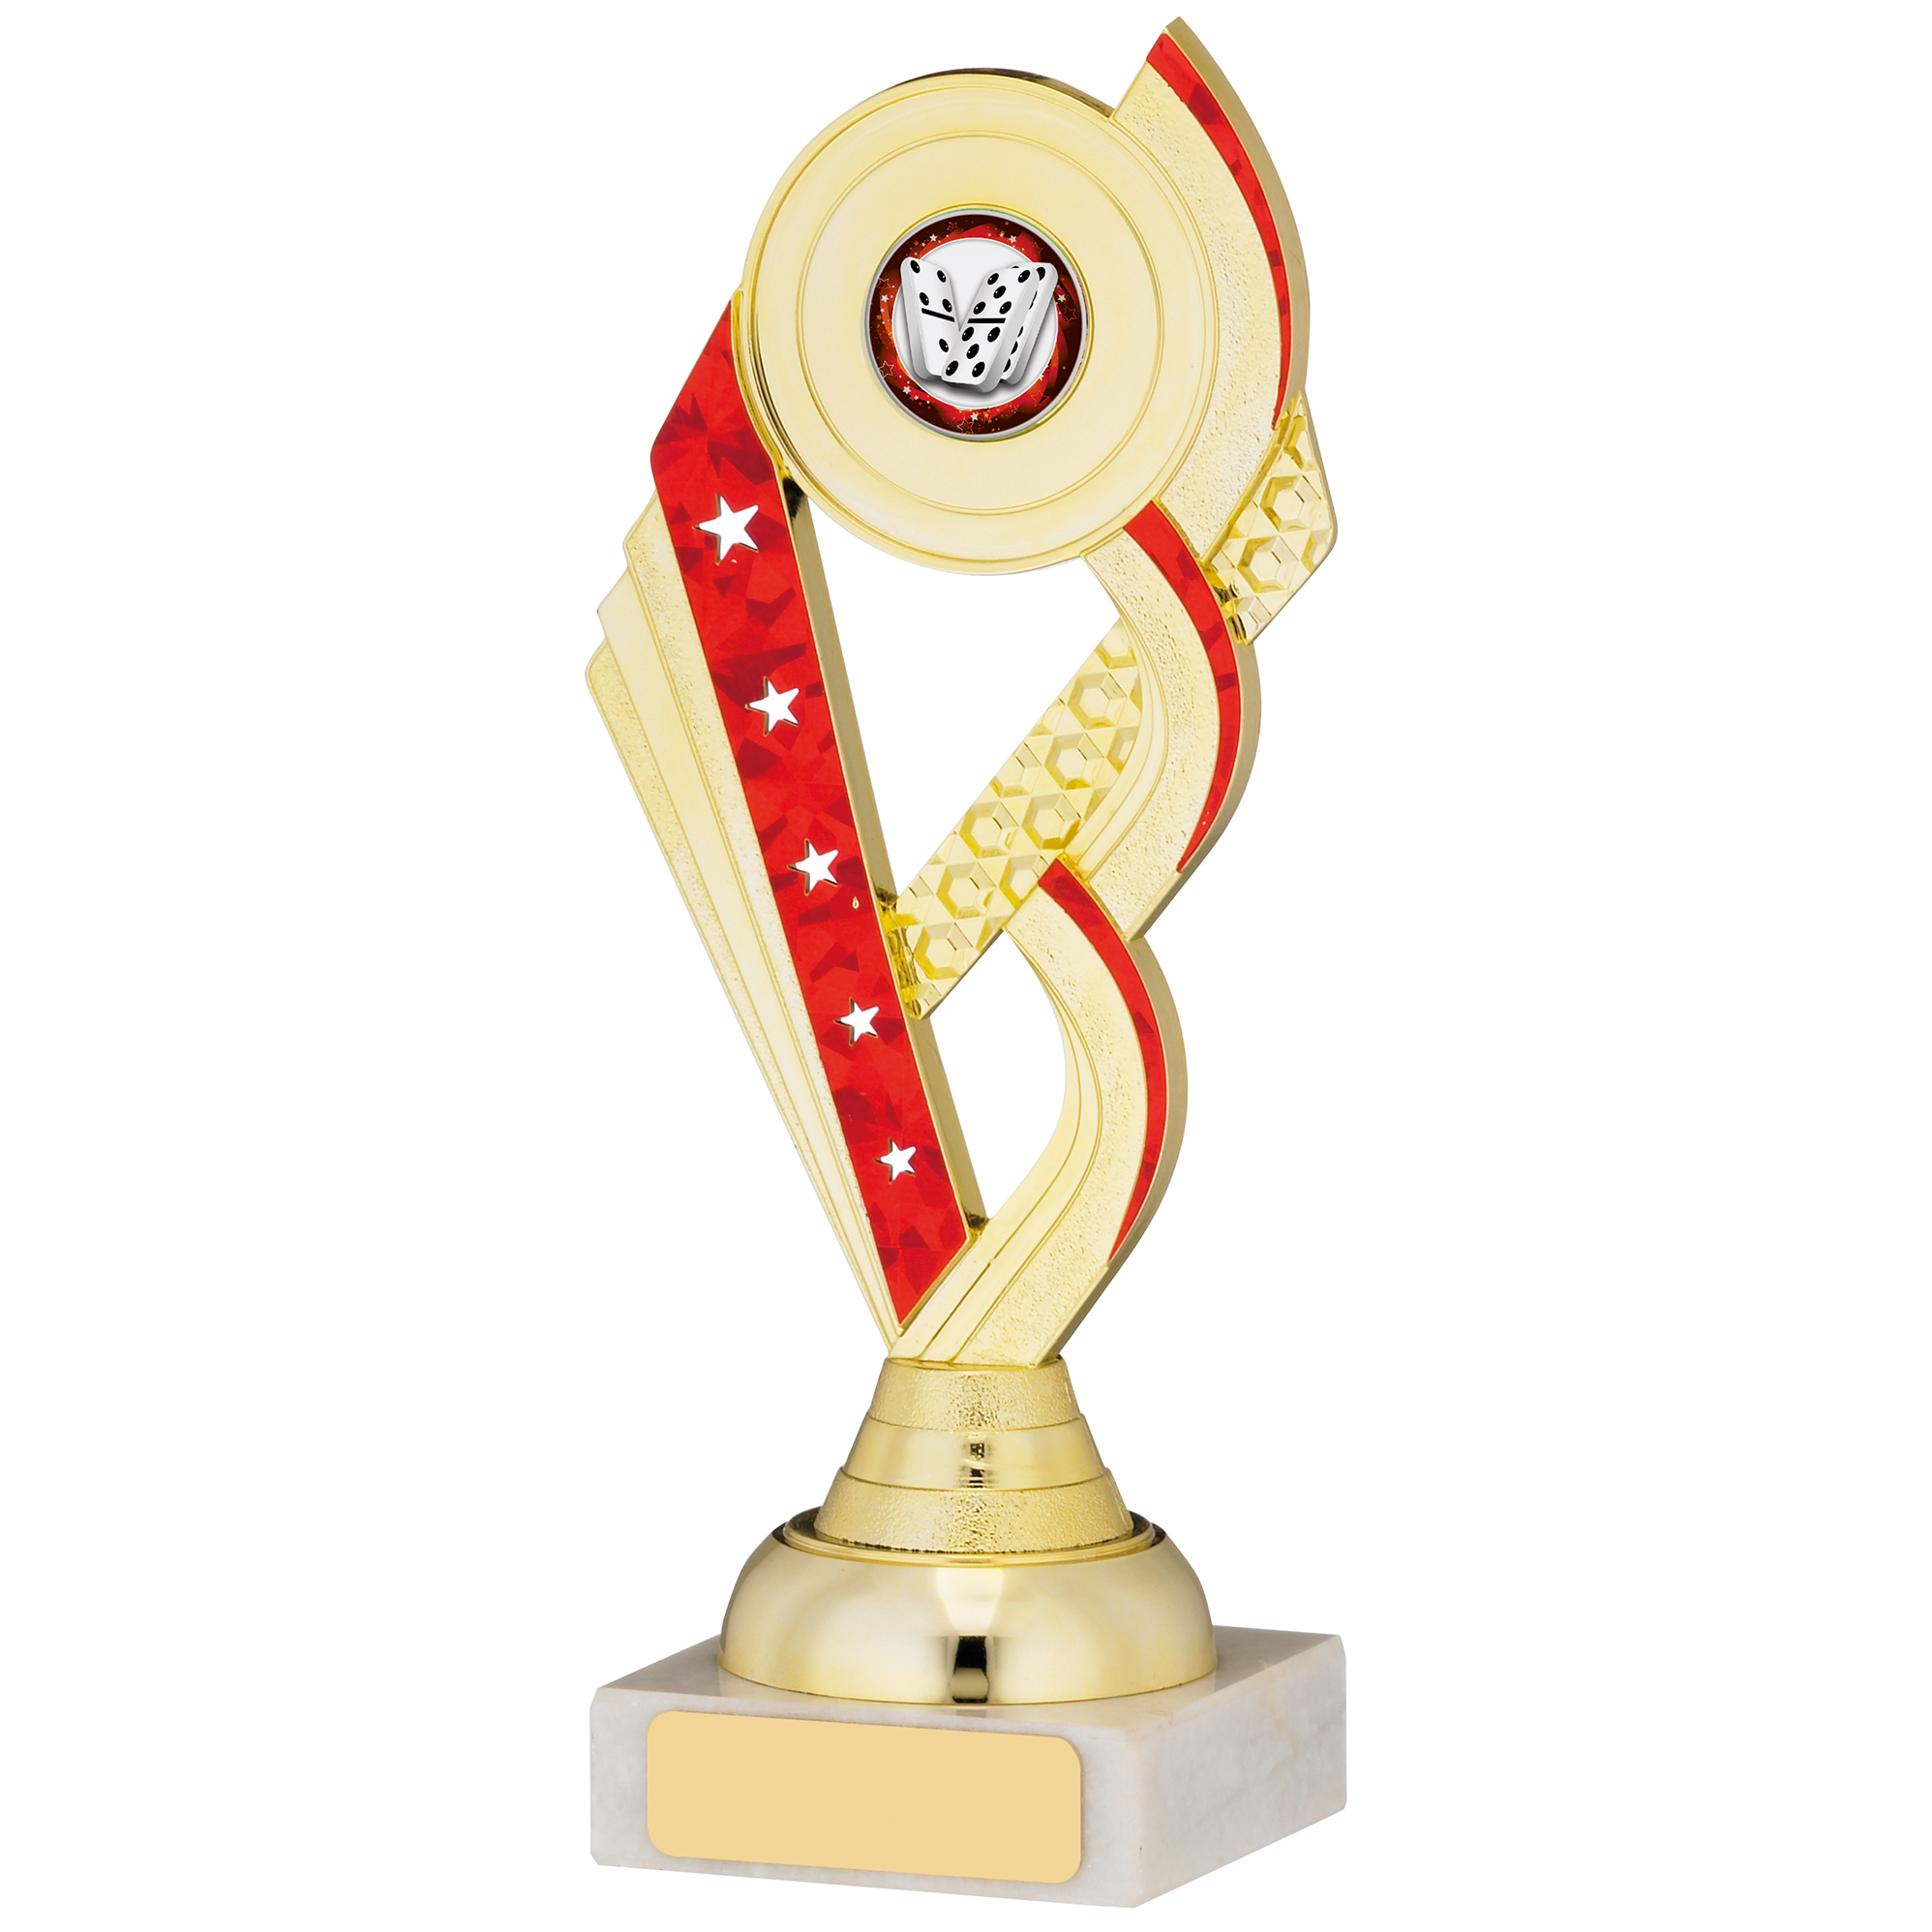 19cm GOLD AND RED TROPHY